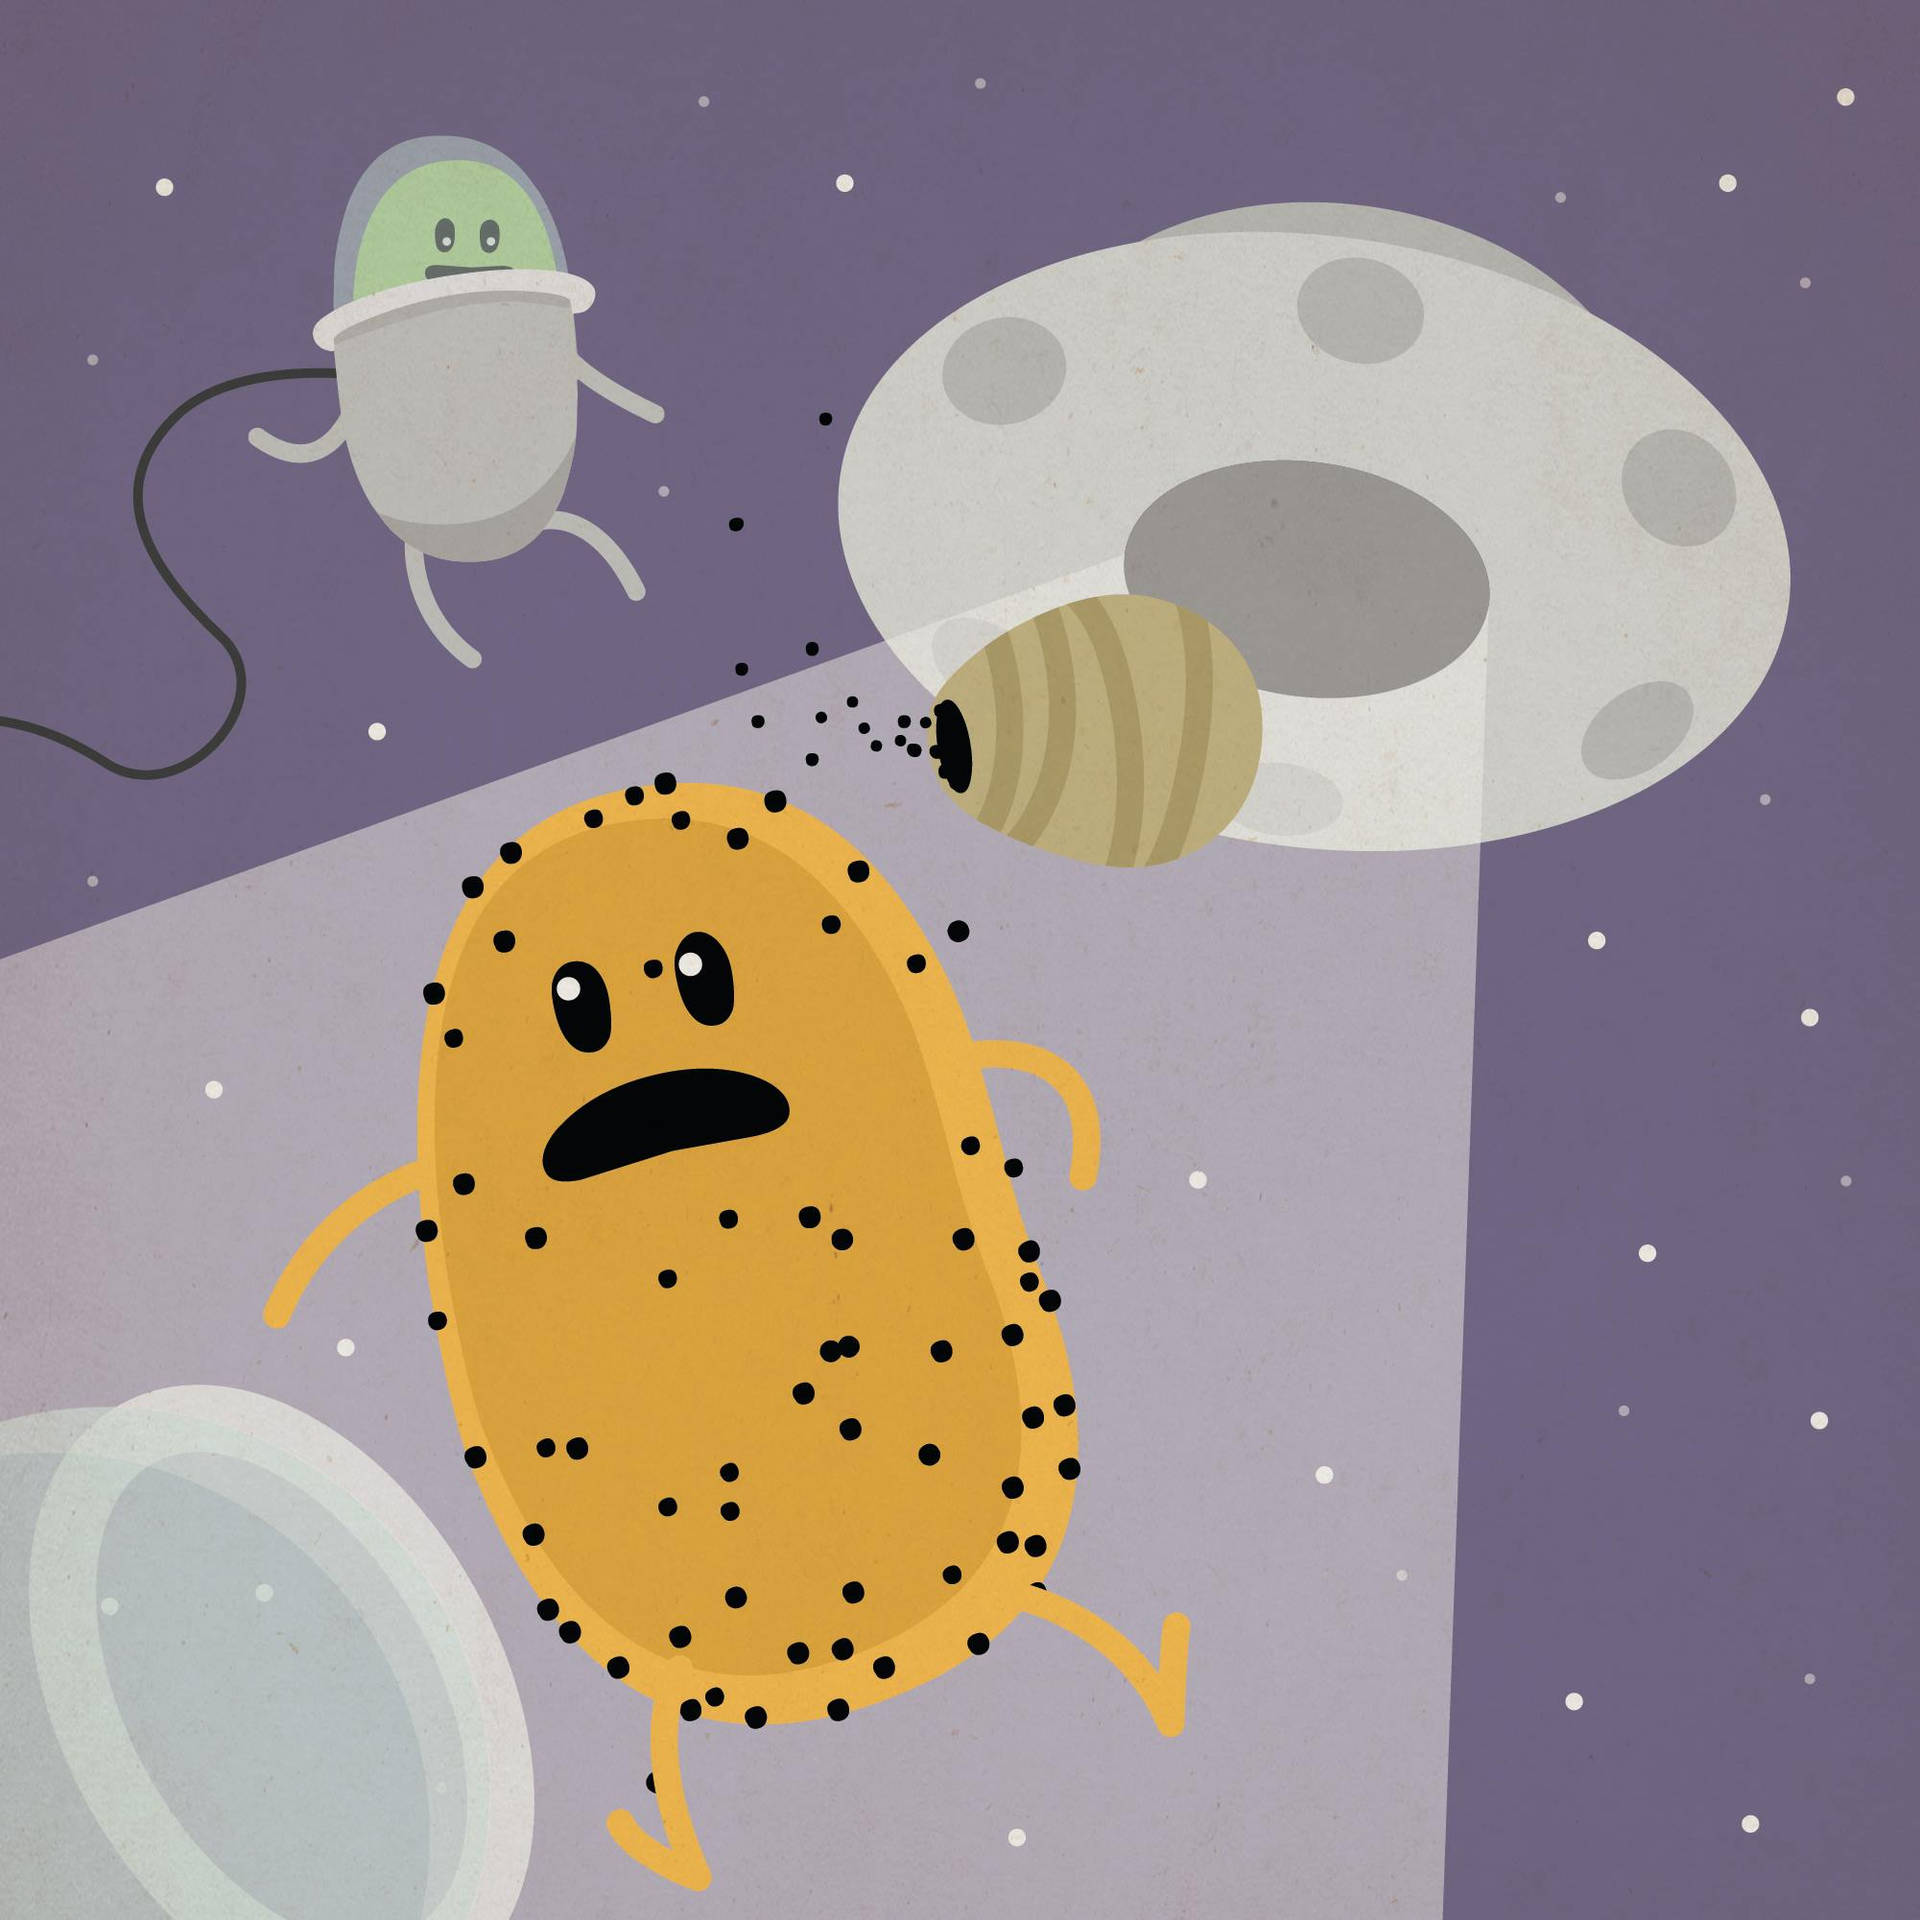 An Amusing Encounter With Wasps In Dumb Ways To Die